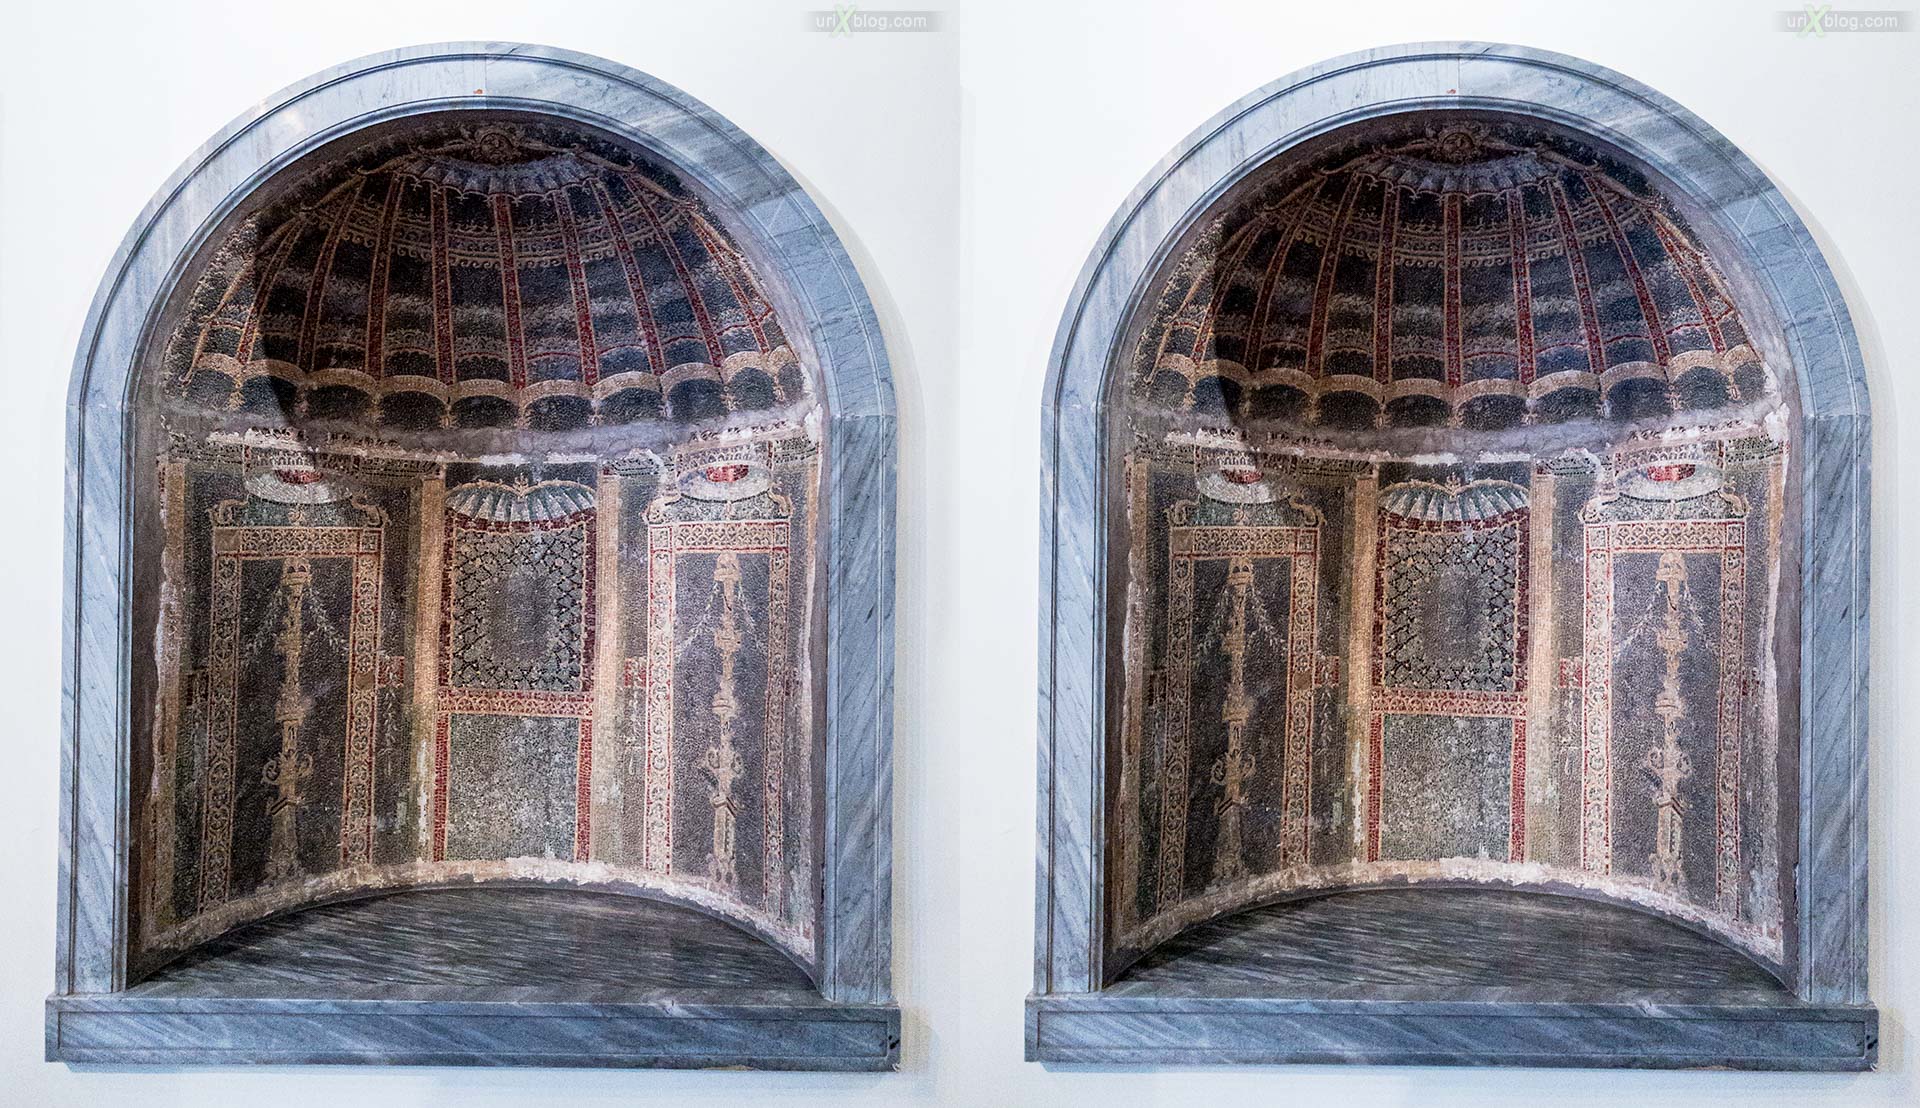 mosaics, National Archaeological Museum of Naples, ancient Rome, Pompei, exhibition, Naples, Italy, 3D, stereo pair, cross-eyed, crossview, cross view stereo pair, stereoscopic